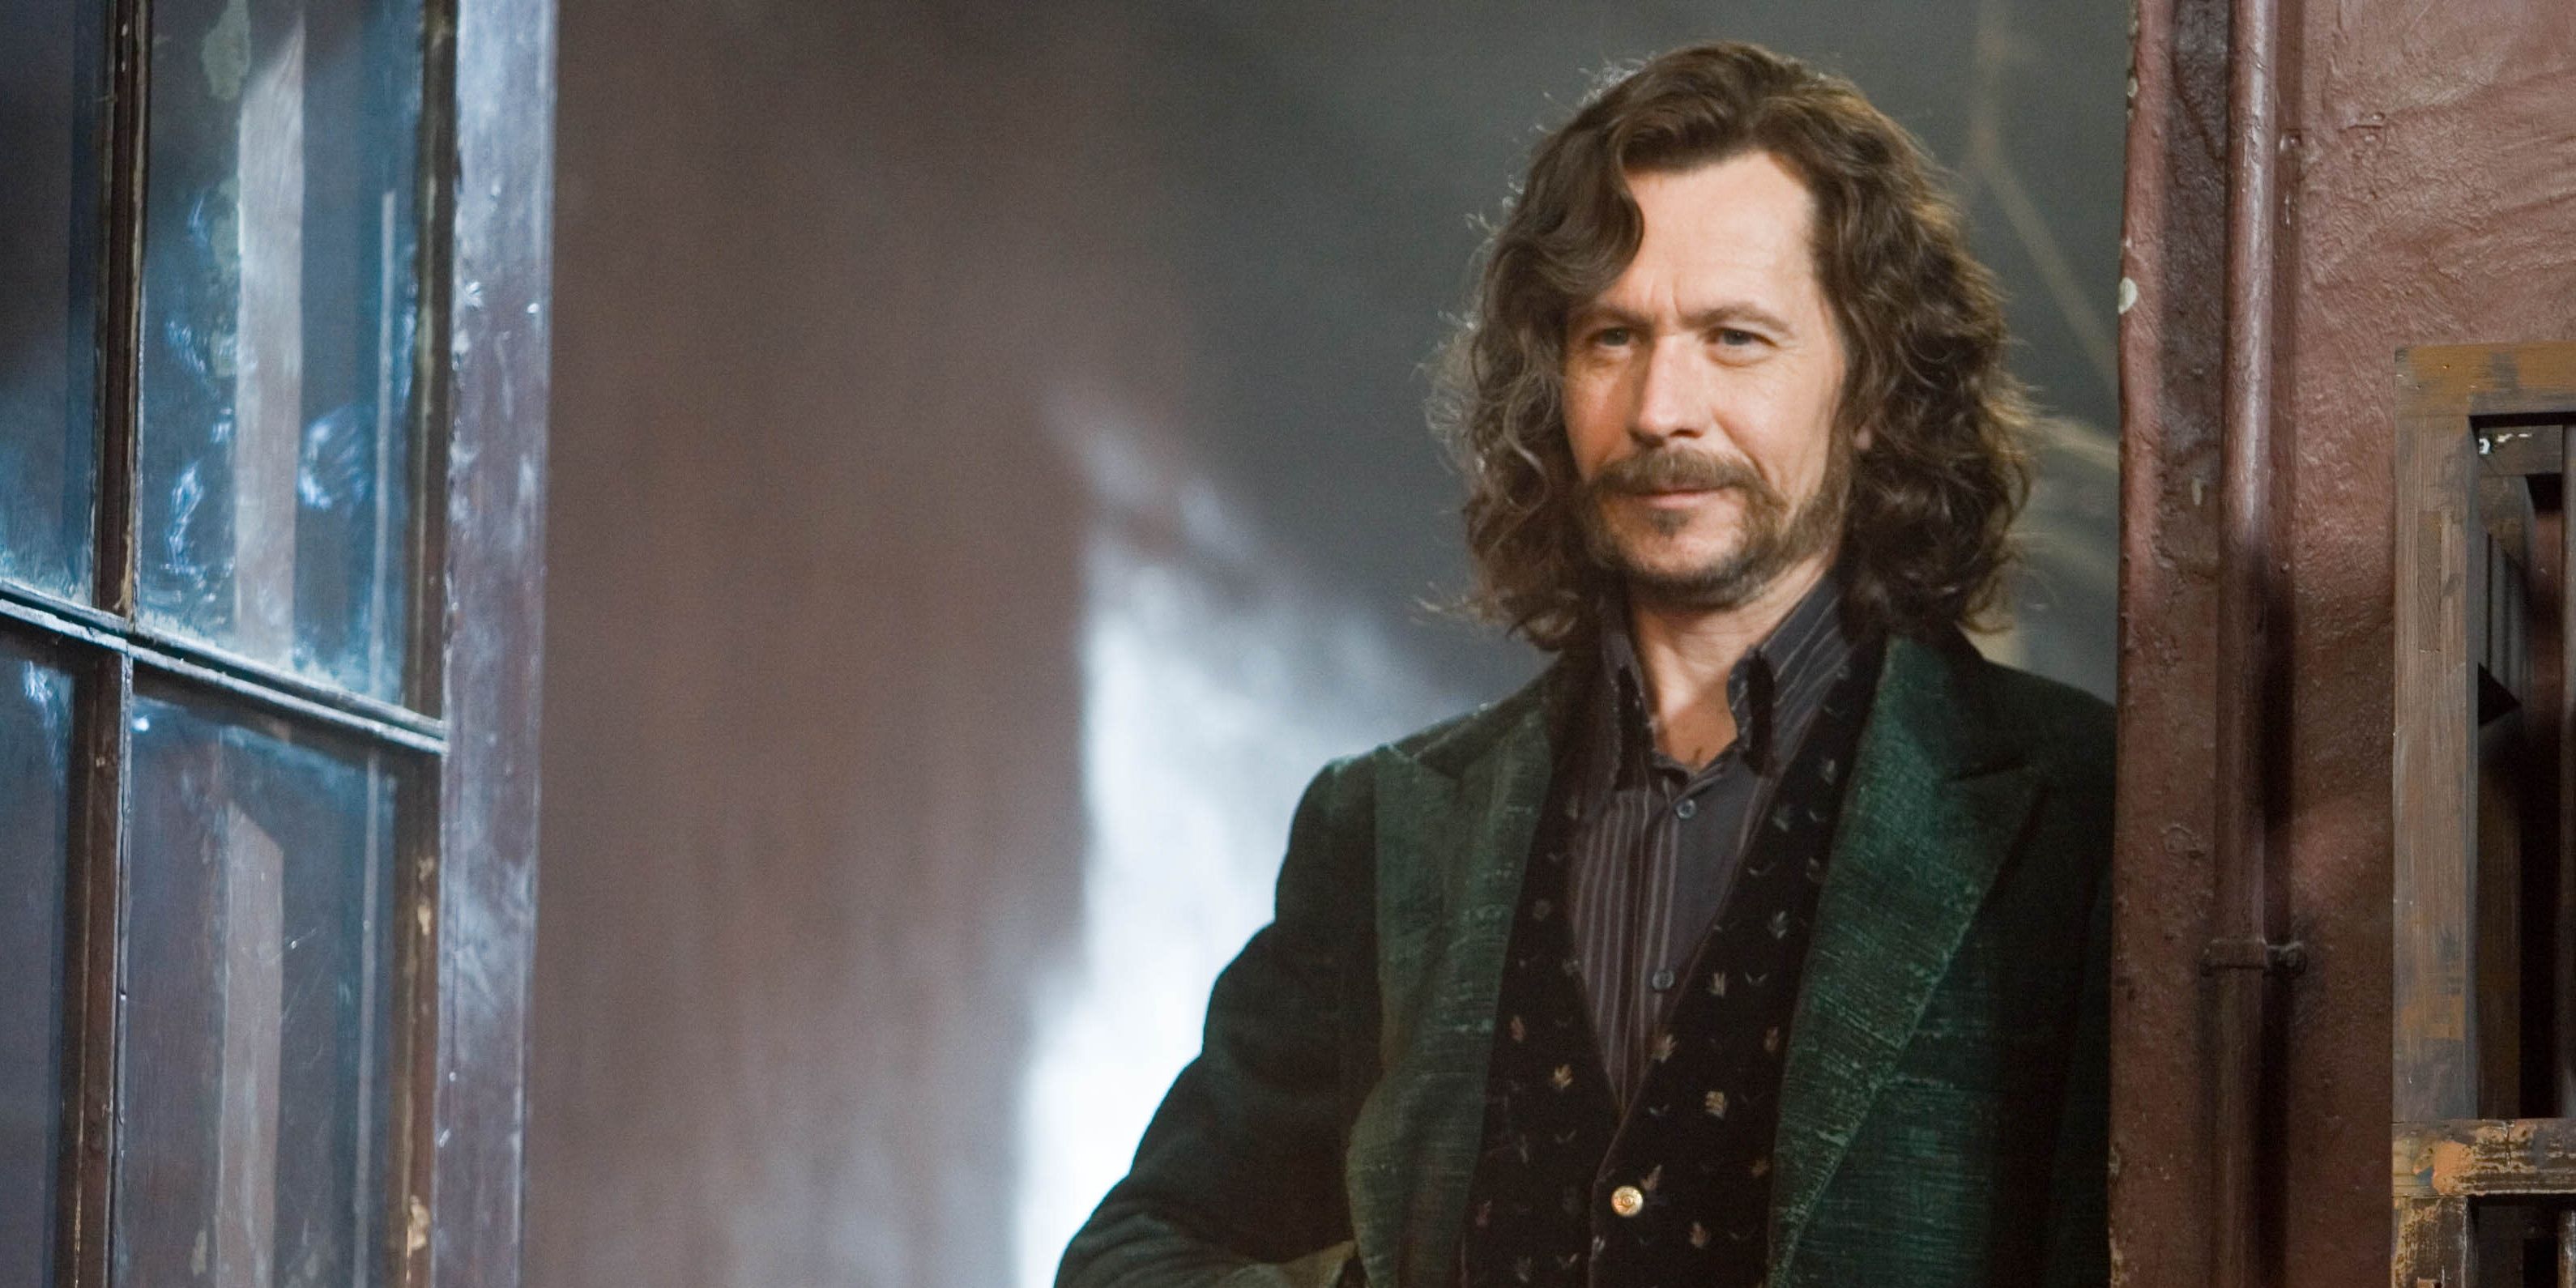 Harry Potter 14 Of The Wisest & Most Inspiring Sirius Black Quotes